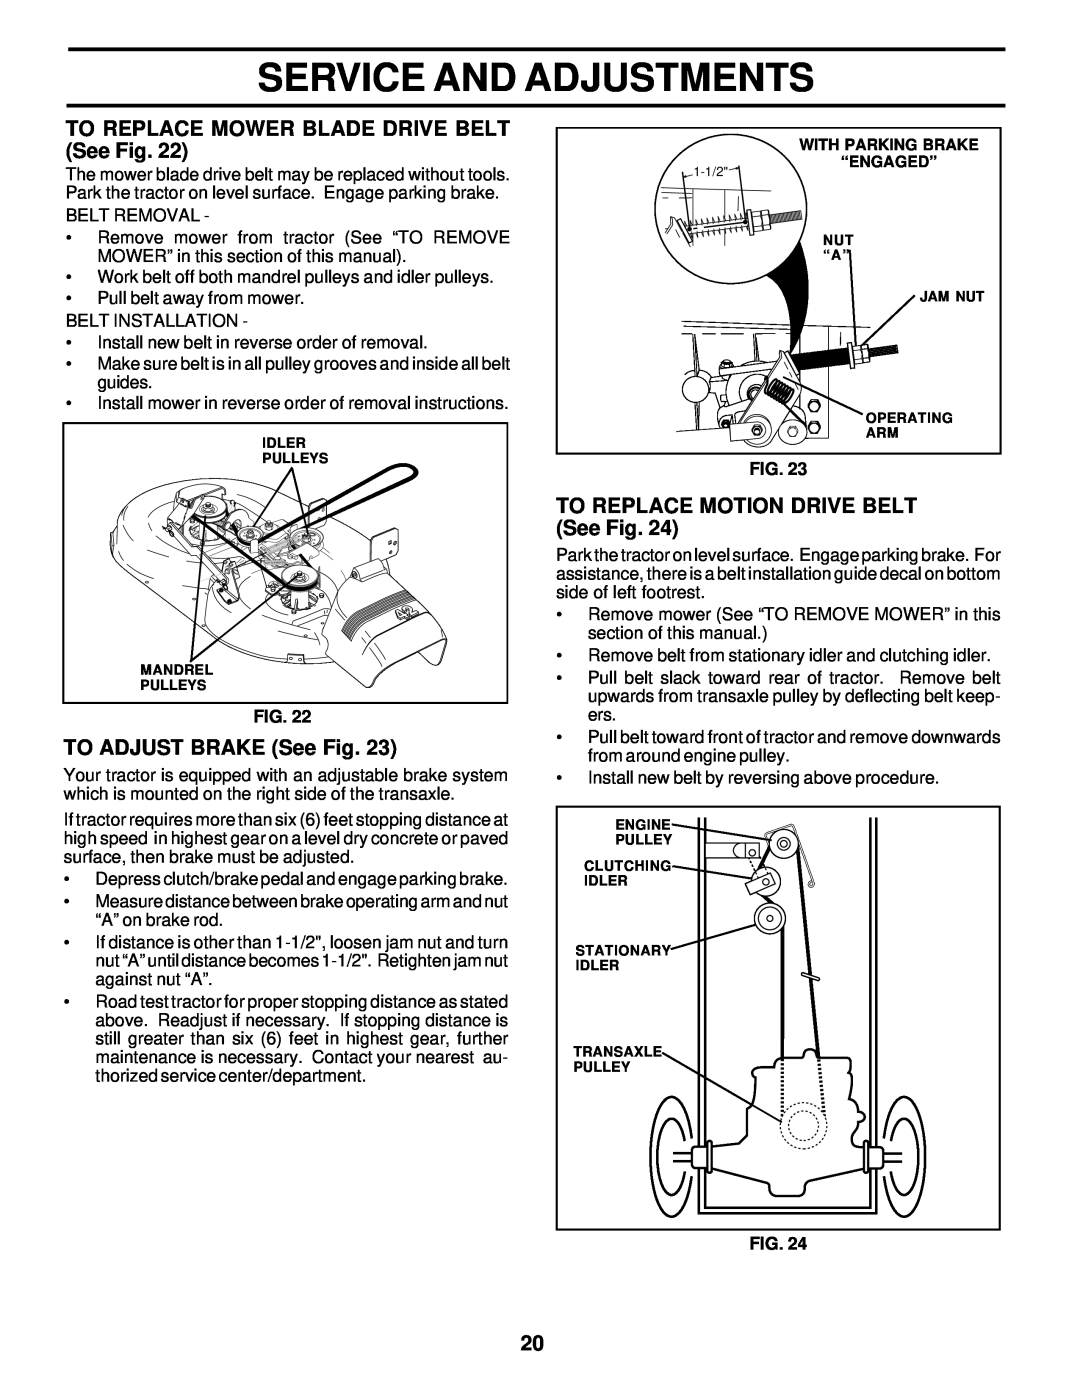 Poulan 178108 TO REPLACE MOWER BLADE DRIVE BELT See Fig, TO ADJUST BRAKE See Fig, TO REPLACE MOTION DRIVE BELT See Fig 